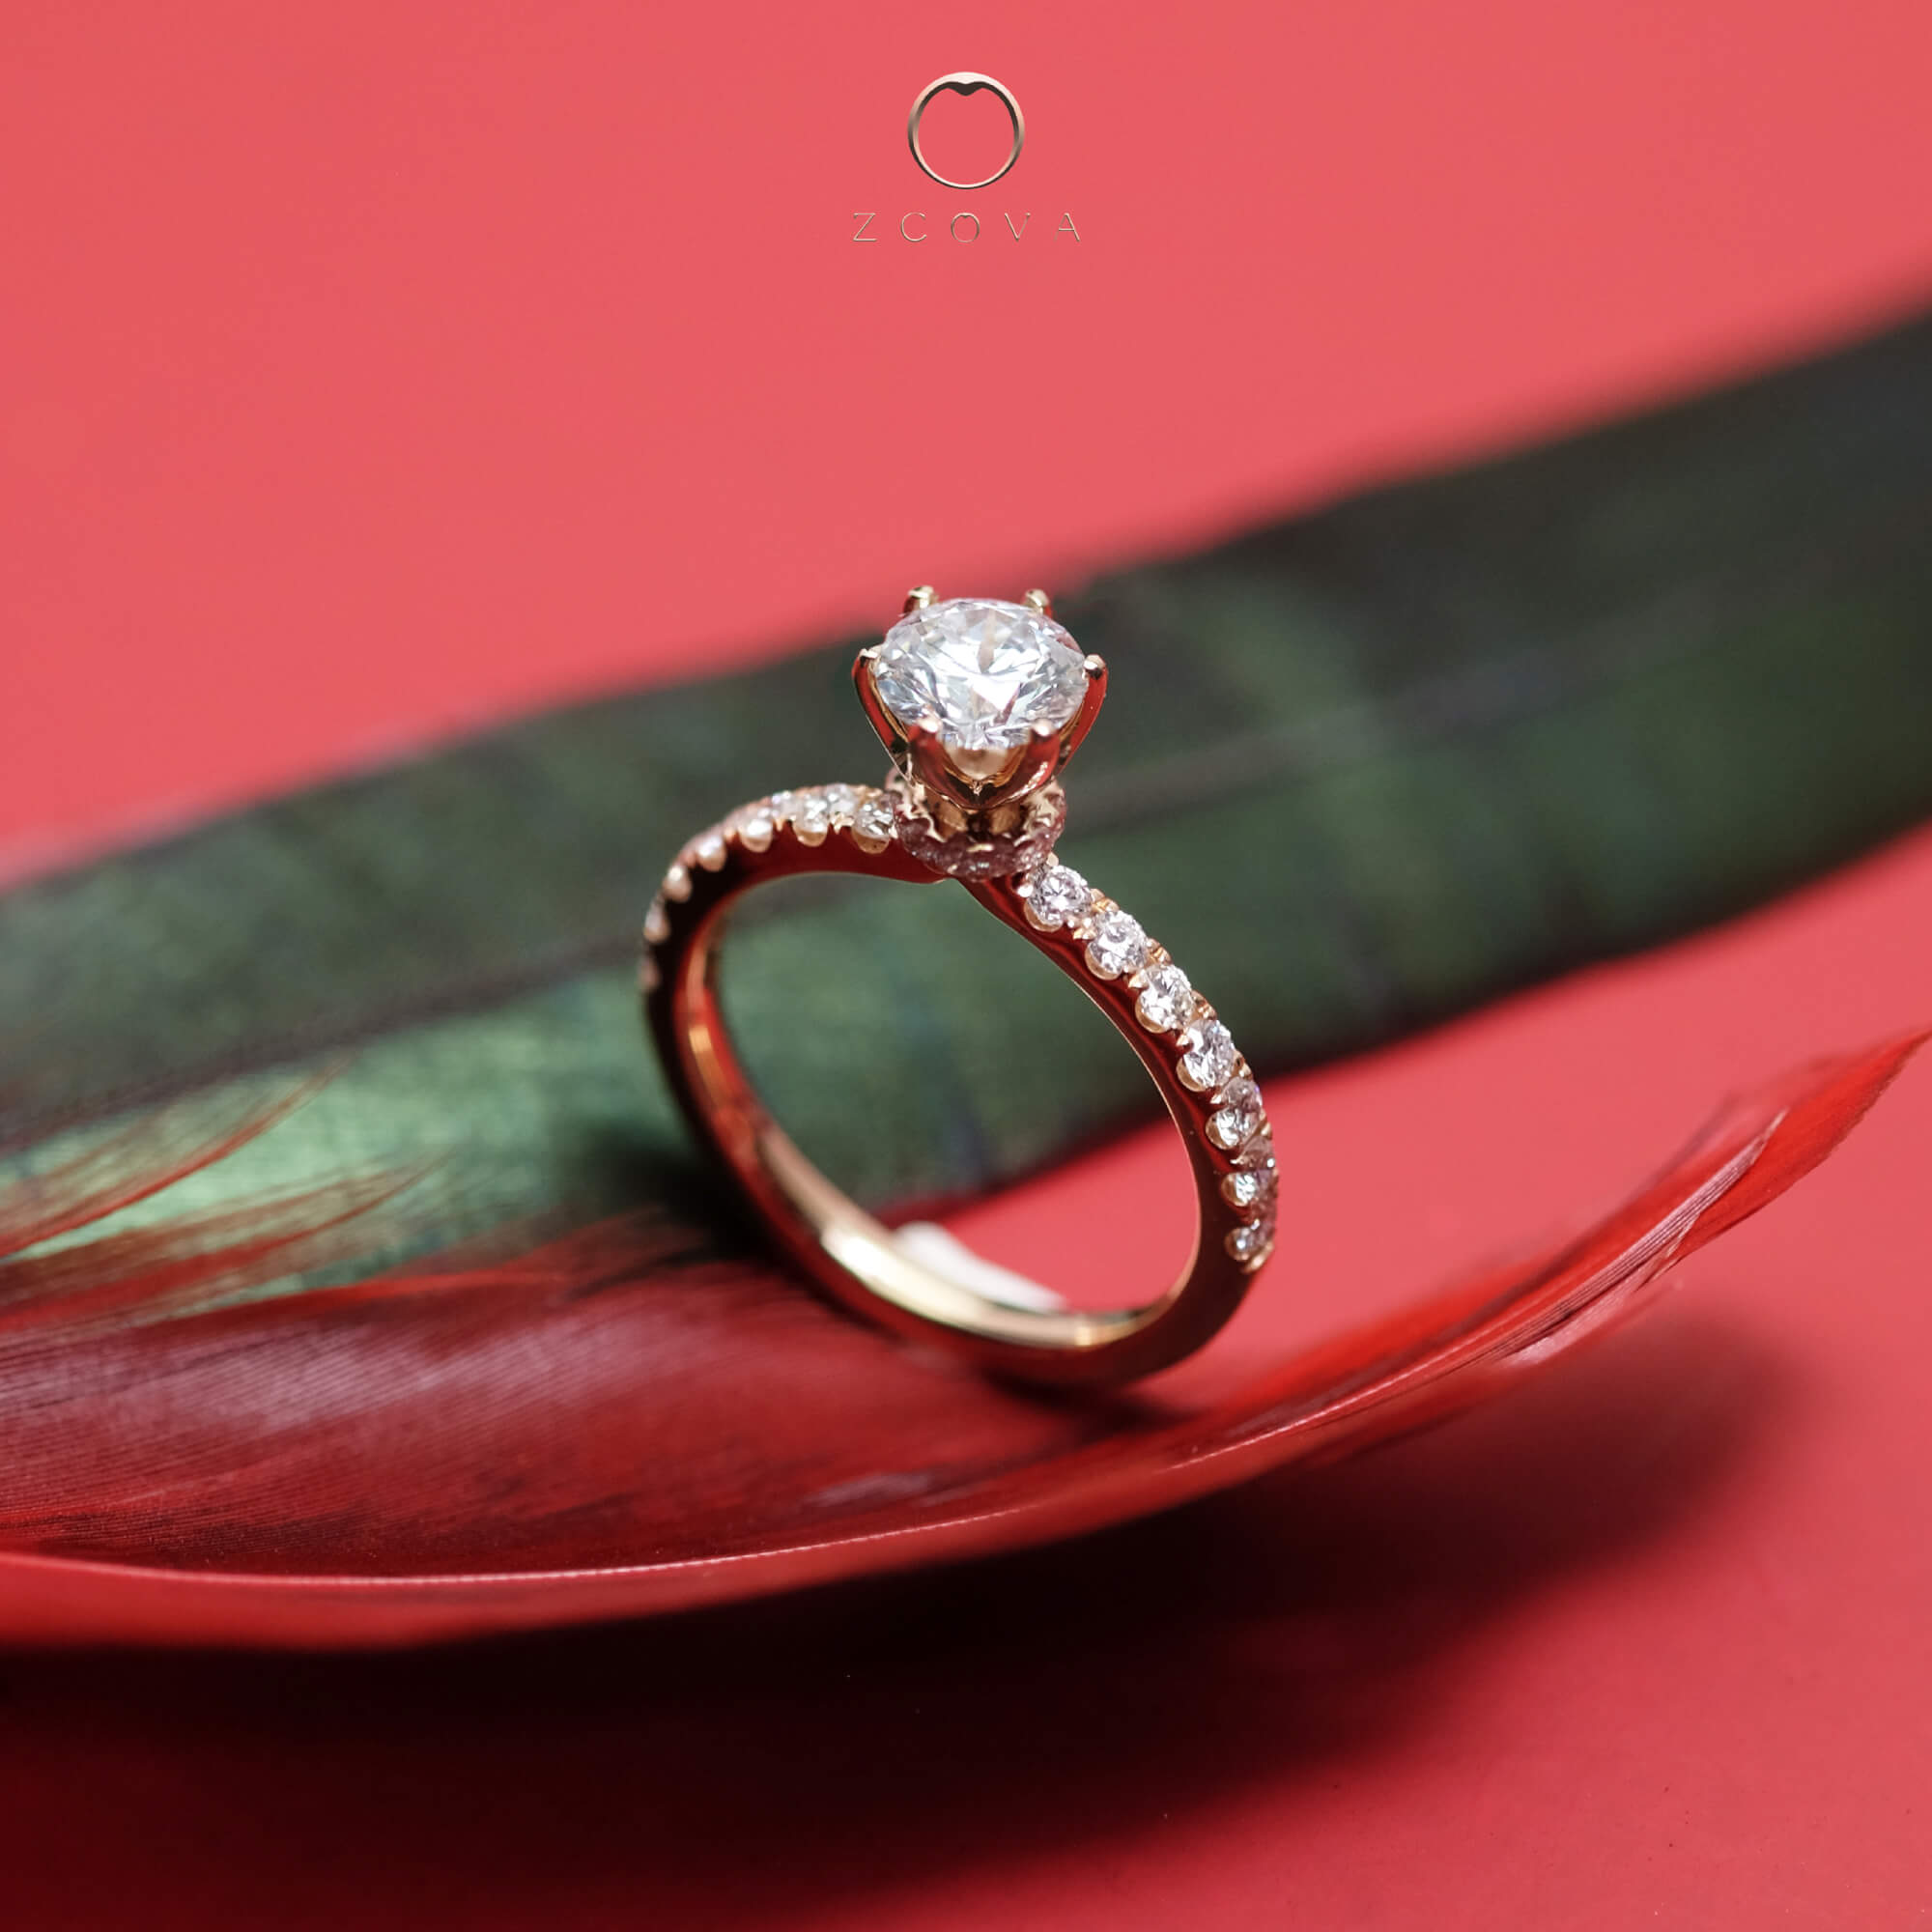 Pave Setting Ring | Shop the Oval Diamond Halo Engagement Ring – deBebians